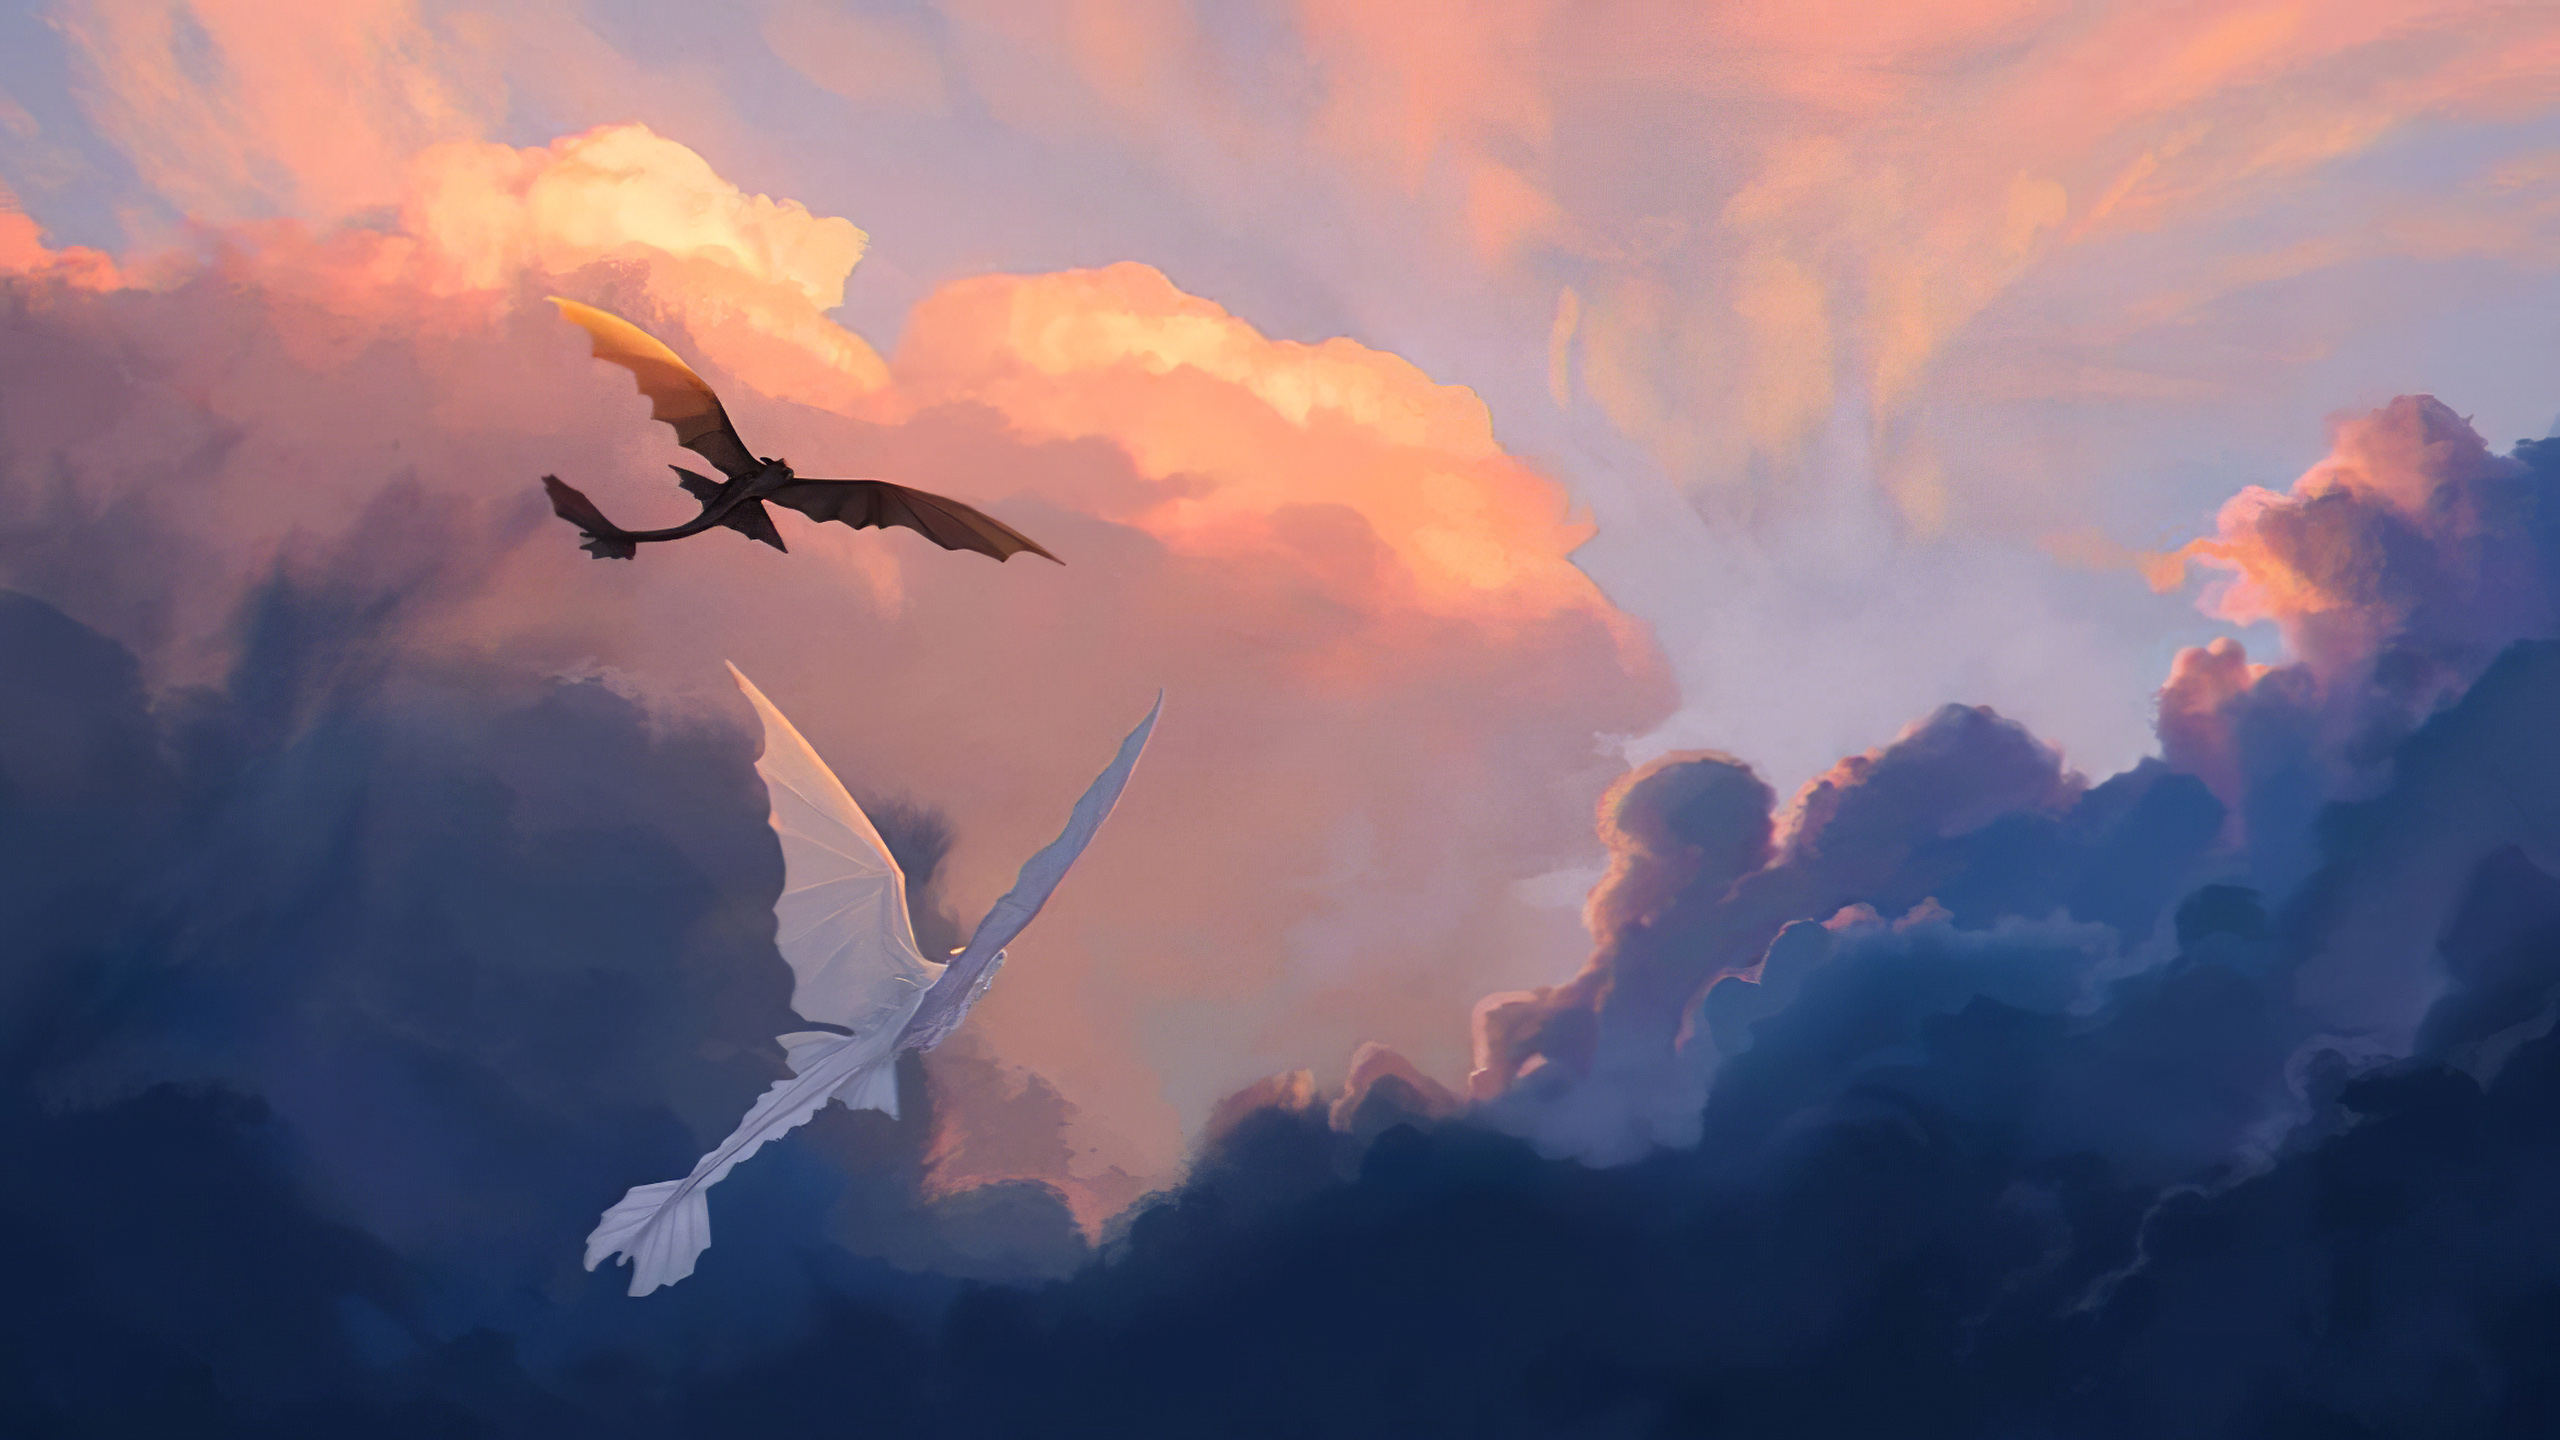 General 2560x1440 How to Train Your Dragon How to Train Your Dragon: The Hidden World digital art Toothless clouds flying dragon